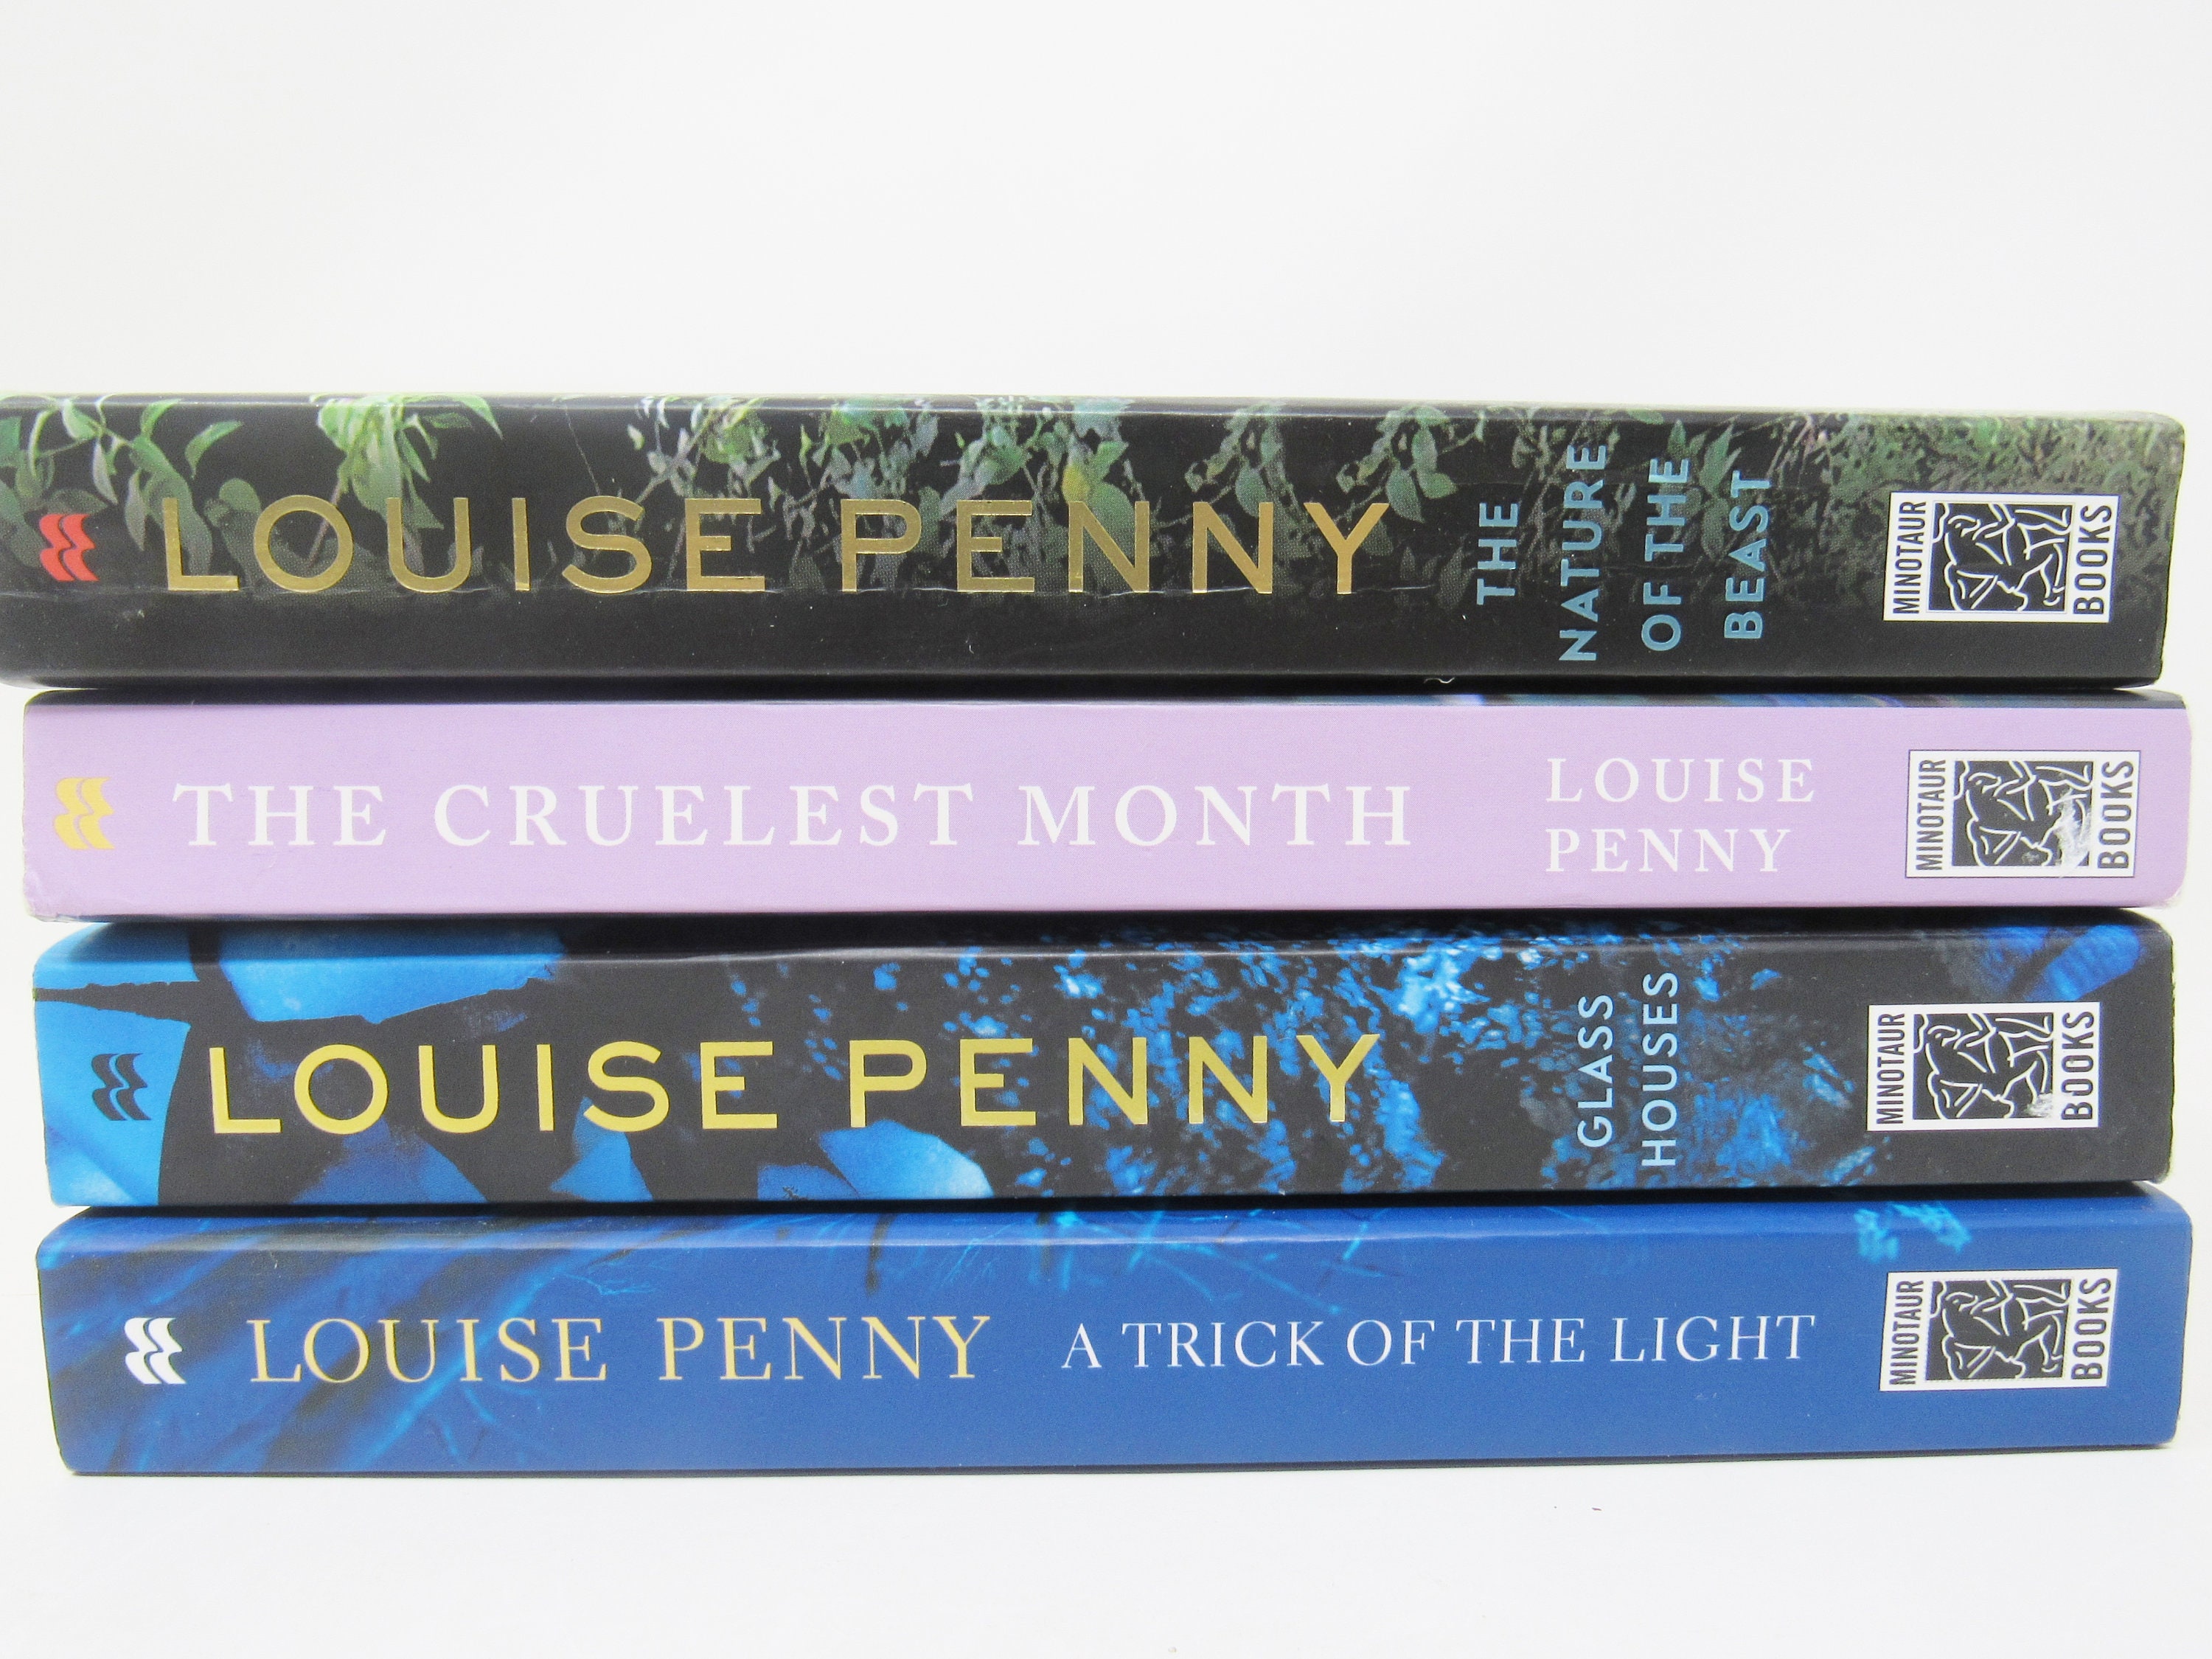 Louise Penny 'A Better Man' Hardcover Book Novel